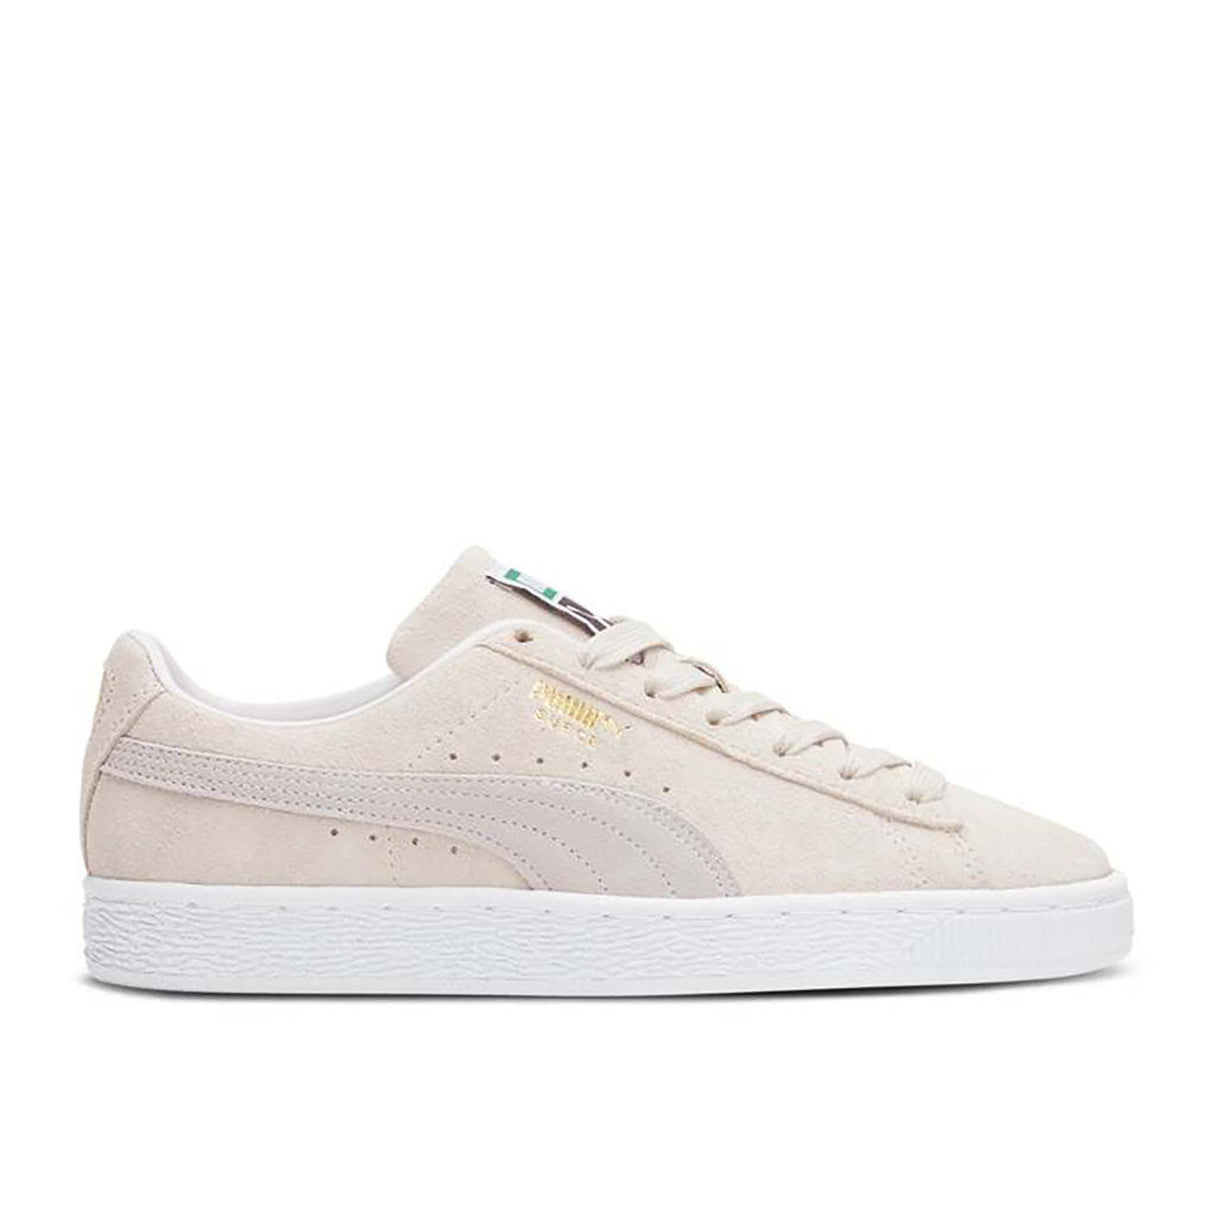 Puma Suede Classic XXI chaussure pour femme marshmallow white